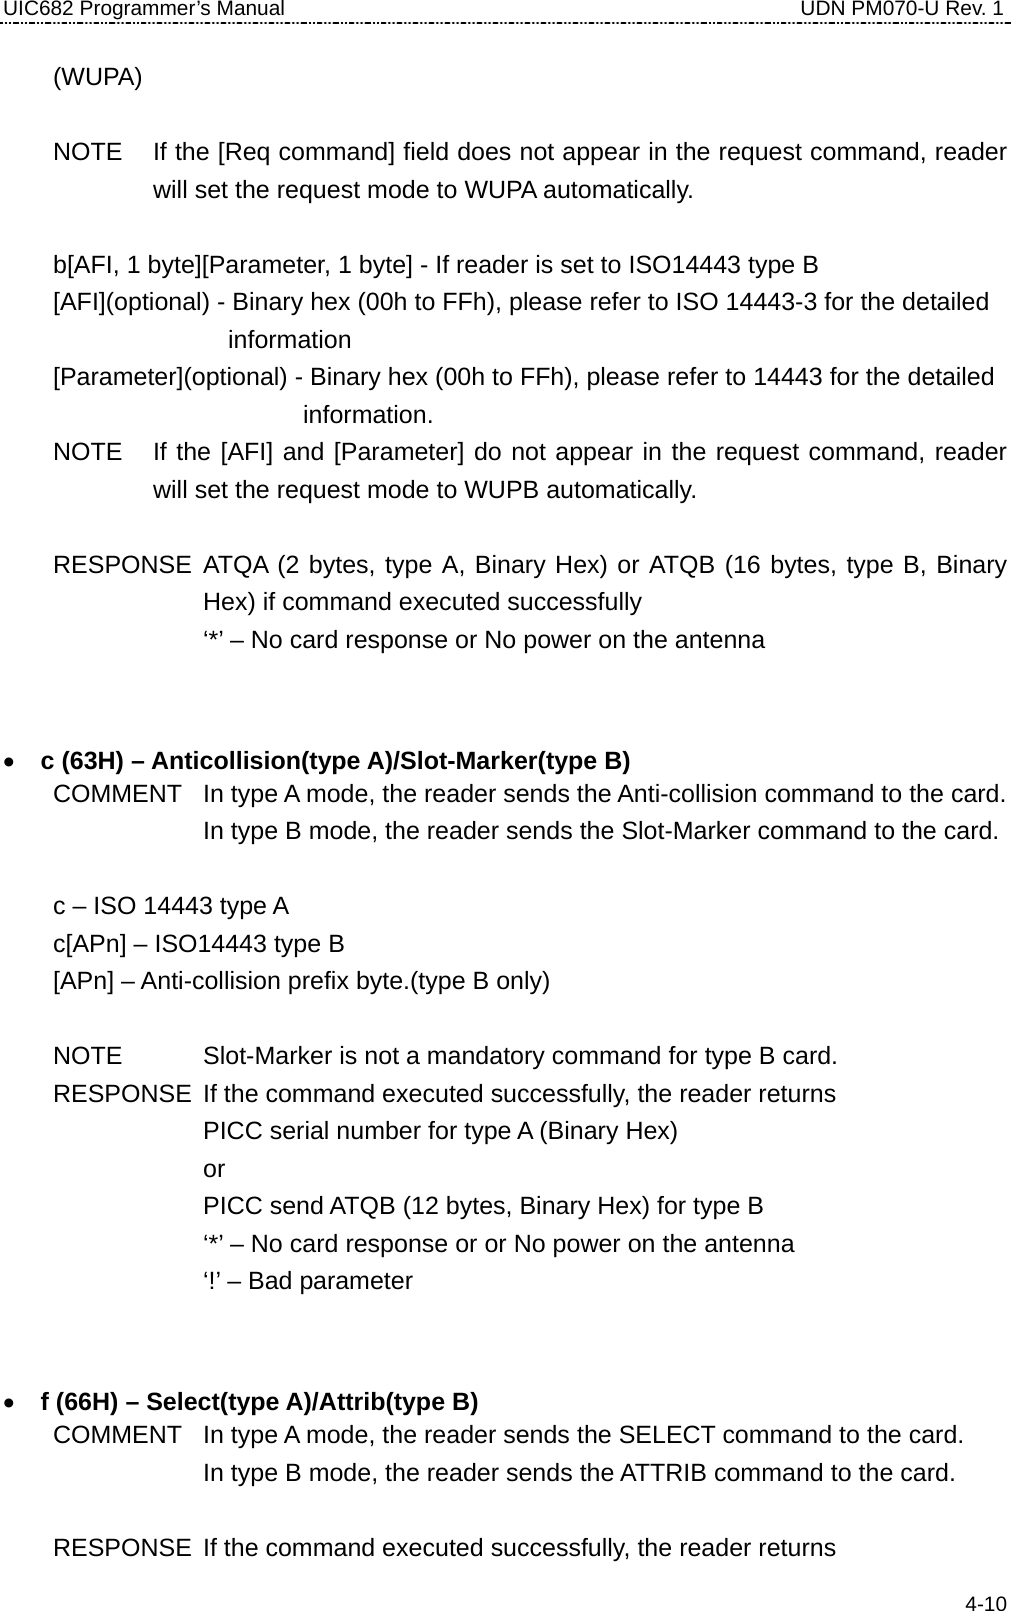 UIC682 Programmer’s Manual                                     UDN PM070-U Rev. 1 (WUPA)  NOTE  If the [Req command] field does not appear in the request command, reader will set the request mode to WUPA automatically.  b[AFI, 1 byte][Parameter, 1 byte] - If reader is set to ISO14443 type B [AFI](optional) - Binary hex (00h to FFh), please refer to ISO 14443-3 for the detailed   information [Parameter](optional) - Binary hex (00h to FFh), please refer to 14443 for the detailed   information. NOTE  If the [AFI] and [Parameter] do not appear in the request command, reader will set the request mode to WUPB automatically.  RESPONSE ATQA (2 bytes, type A, Binary Hex) or ATQB (16 bytes, type B, Binary Hex) if command executed successfully         ‘*’ – No card response or No power on the antenna    • c (63H) – Anticollision(type A)/Slot-Marker(type B) COMMENT  In type A mode, the reader sends the Anti-collision command to the card. In type B mode, the reader sends the Slot-Marker command to the card.  c – ISO 14443 type A c[APn] – ISO14443 type B   [APn] – Anti-collision prefix byte.(type B only)  NOTE    Slot-Marker is not a mandatory command for type B card. RESPONSE  If the command executed successfully, the reader returns PICC serial number for type A (Binary Hex)     or         PICC send ATQB (12 bytes, Binary Hex) for type B         ‘*’ – No card response or or No power on the antenna     ‘!’ – Bad parameter    • f (66H) – Select(type A)/Attrib(type B) COMMENT  In type A mode, the reader sends the SELECT command to the card. In type B mode, the reader sends the ATTRIB command to the card.  RESPONSE  If the command executed successfully, the reader returns  4-10